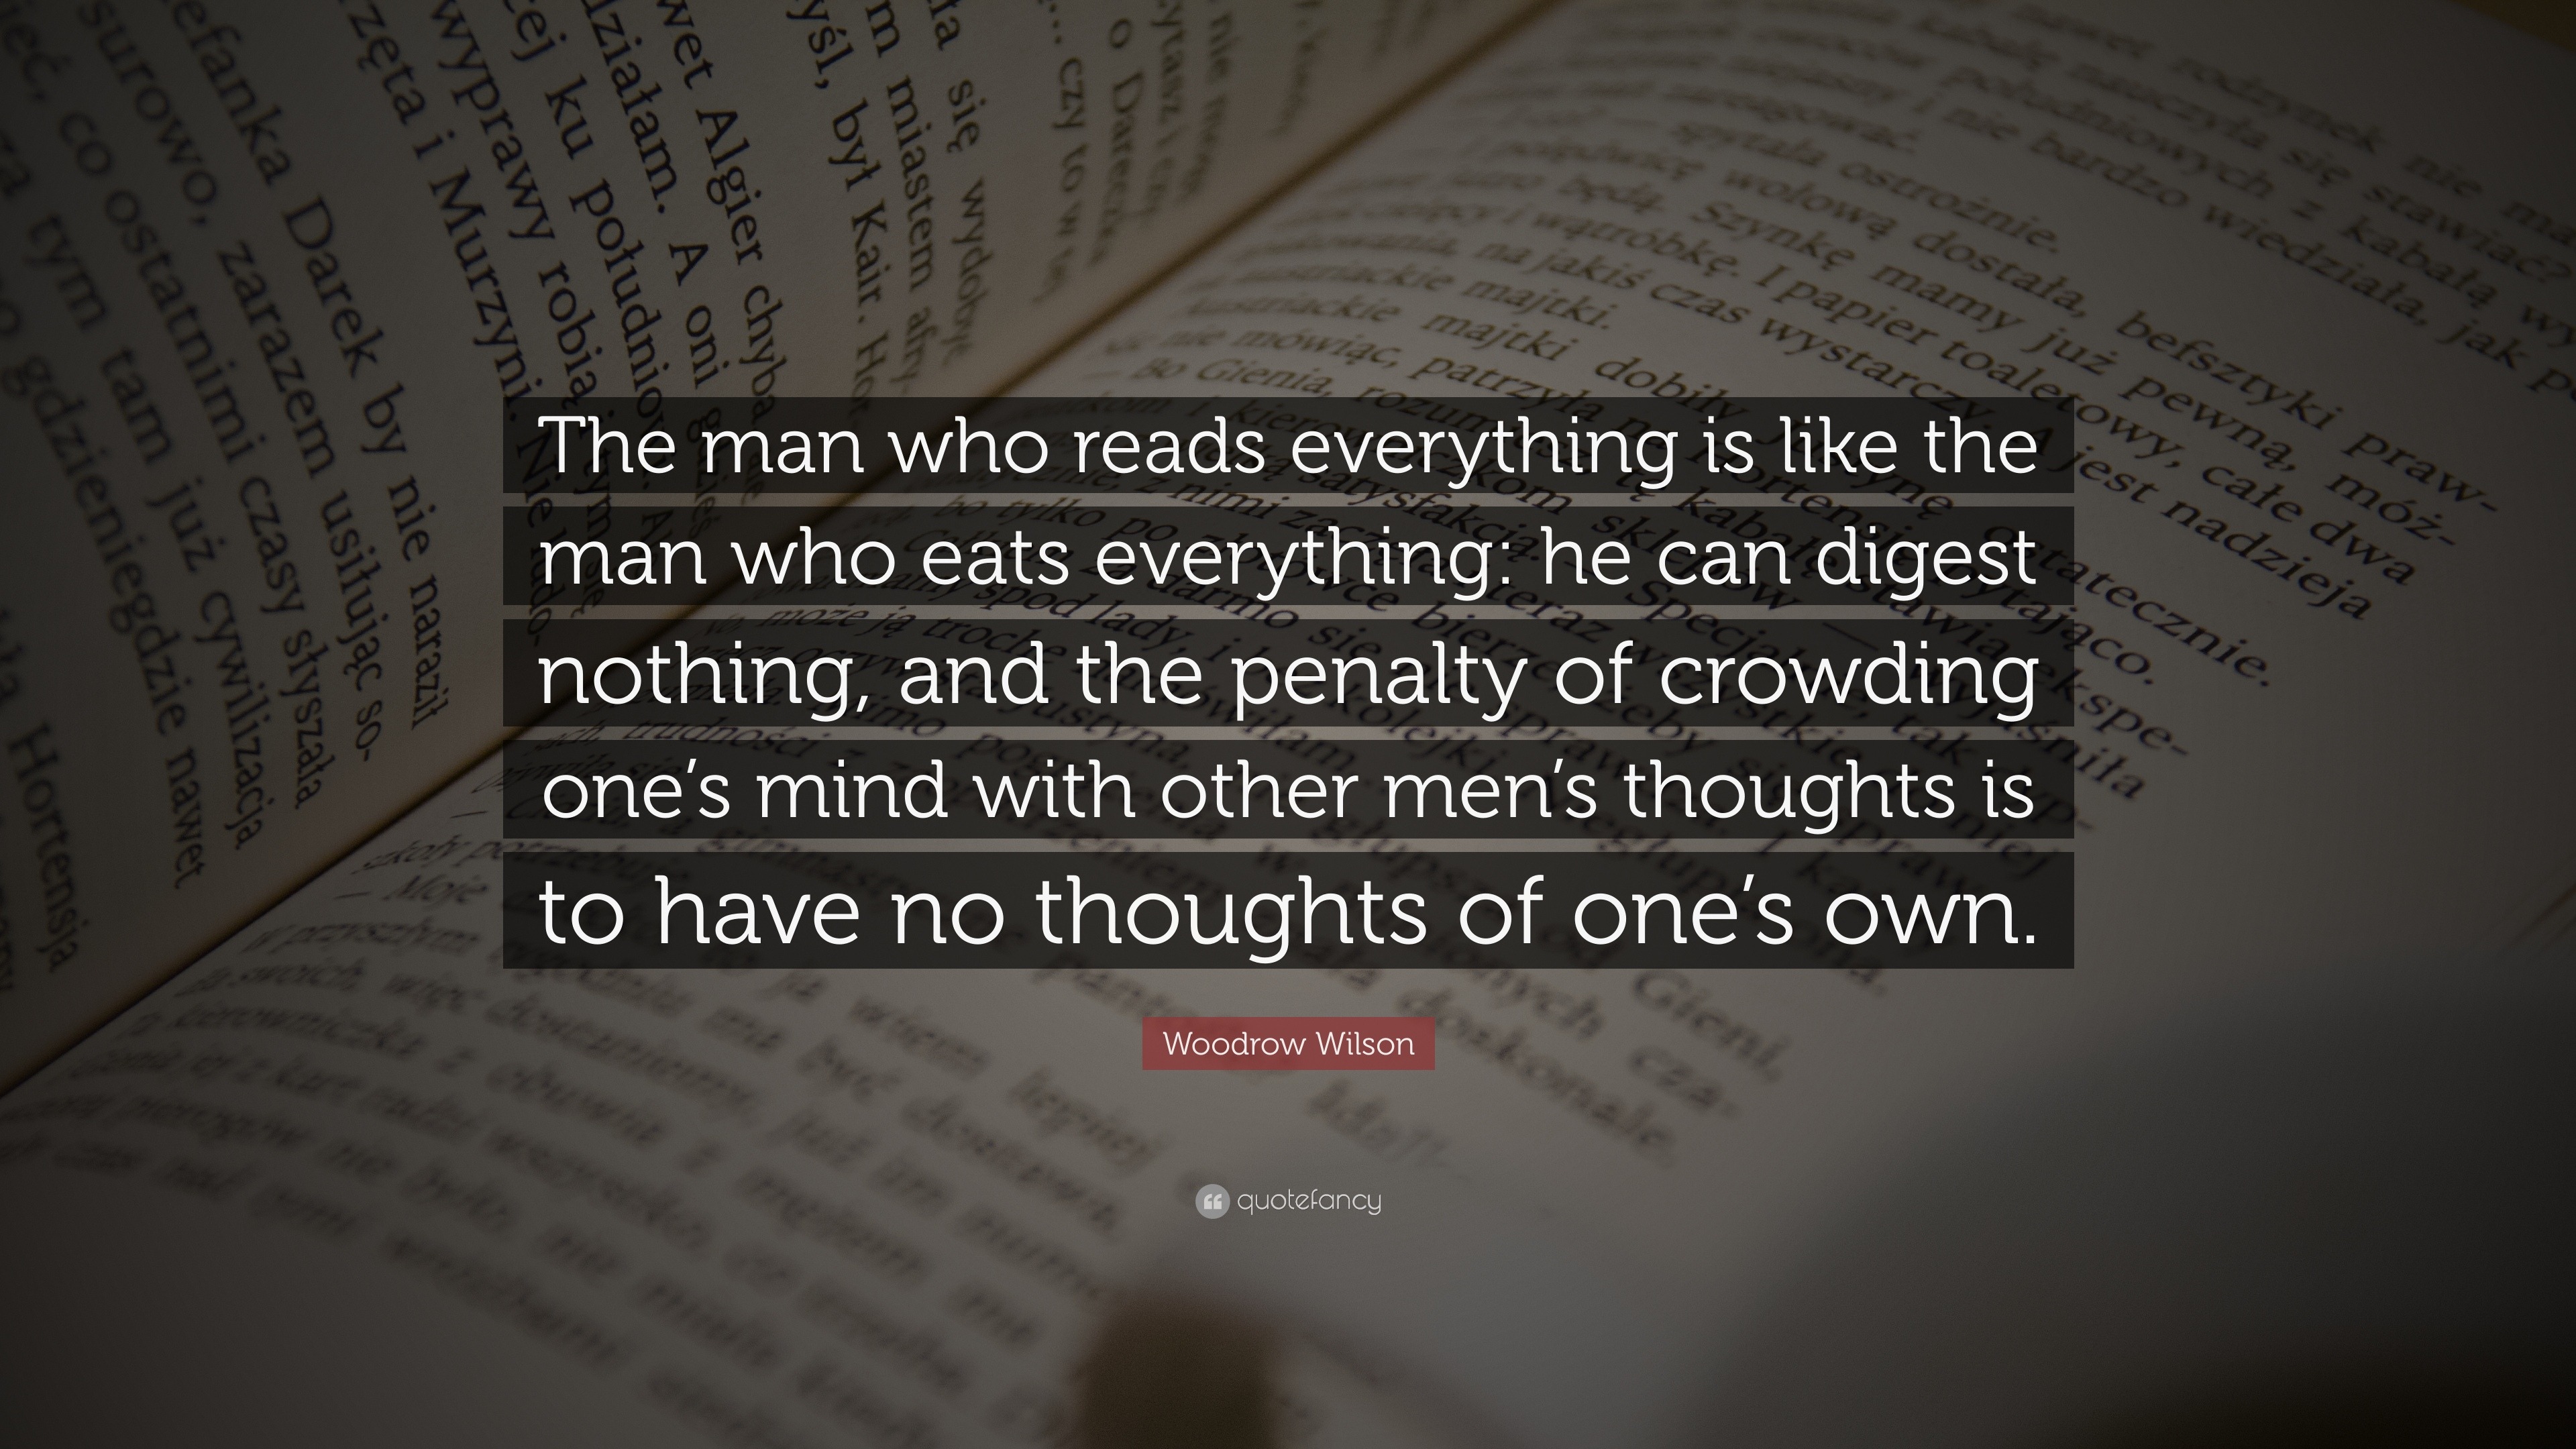 Woodrow Wilson Quote: “The man who reads everything is like the man who ...